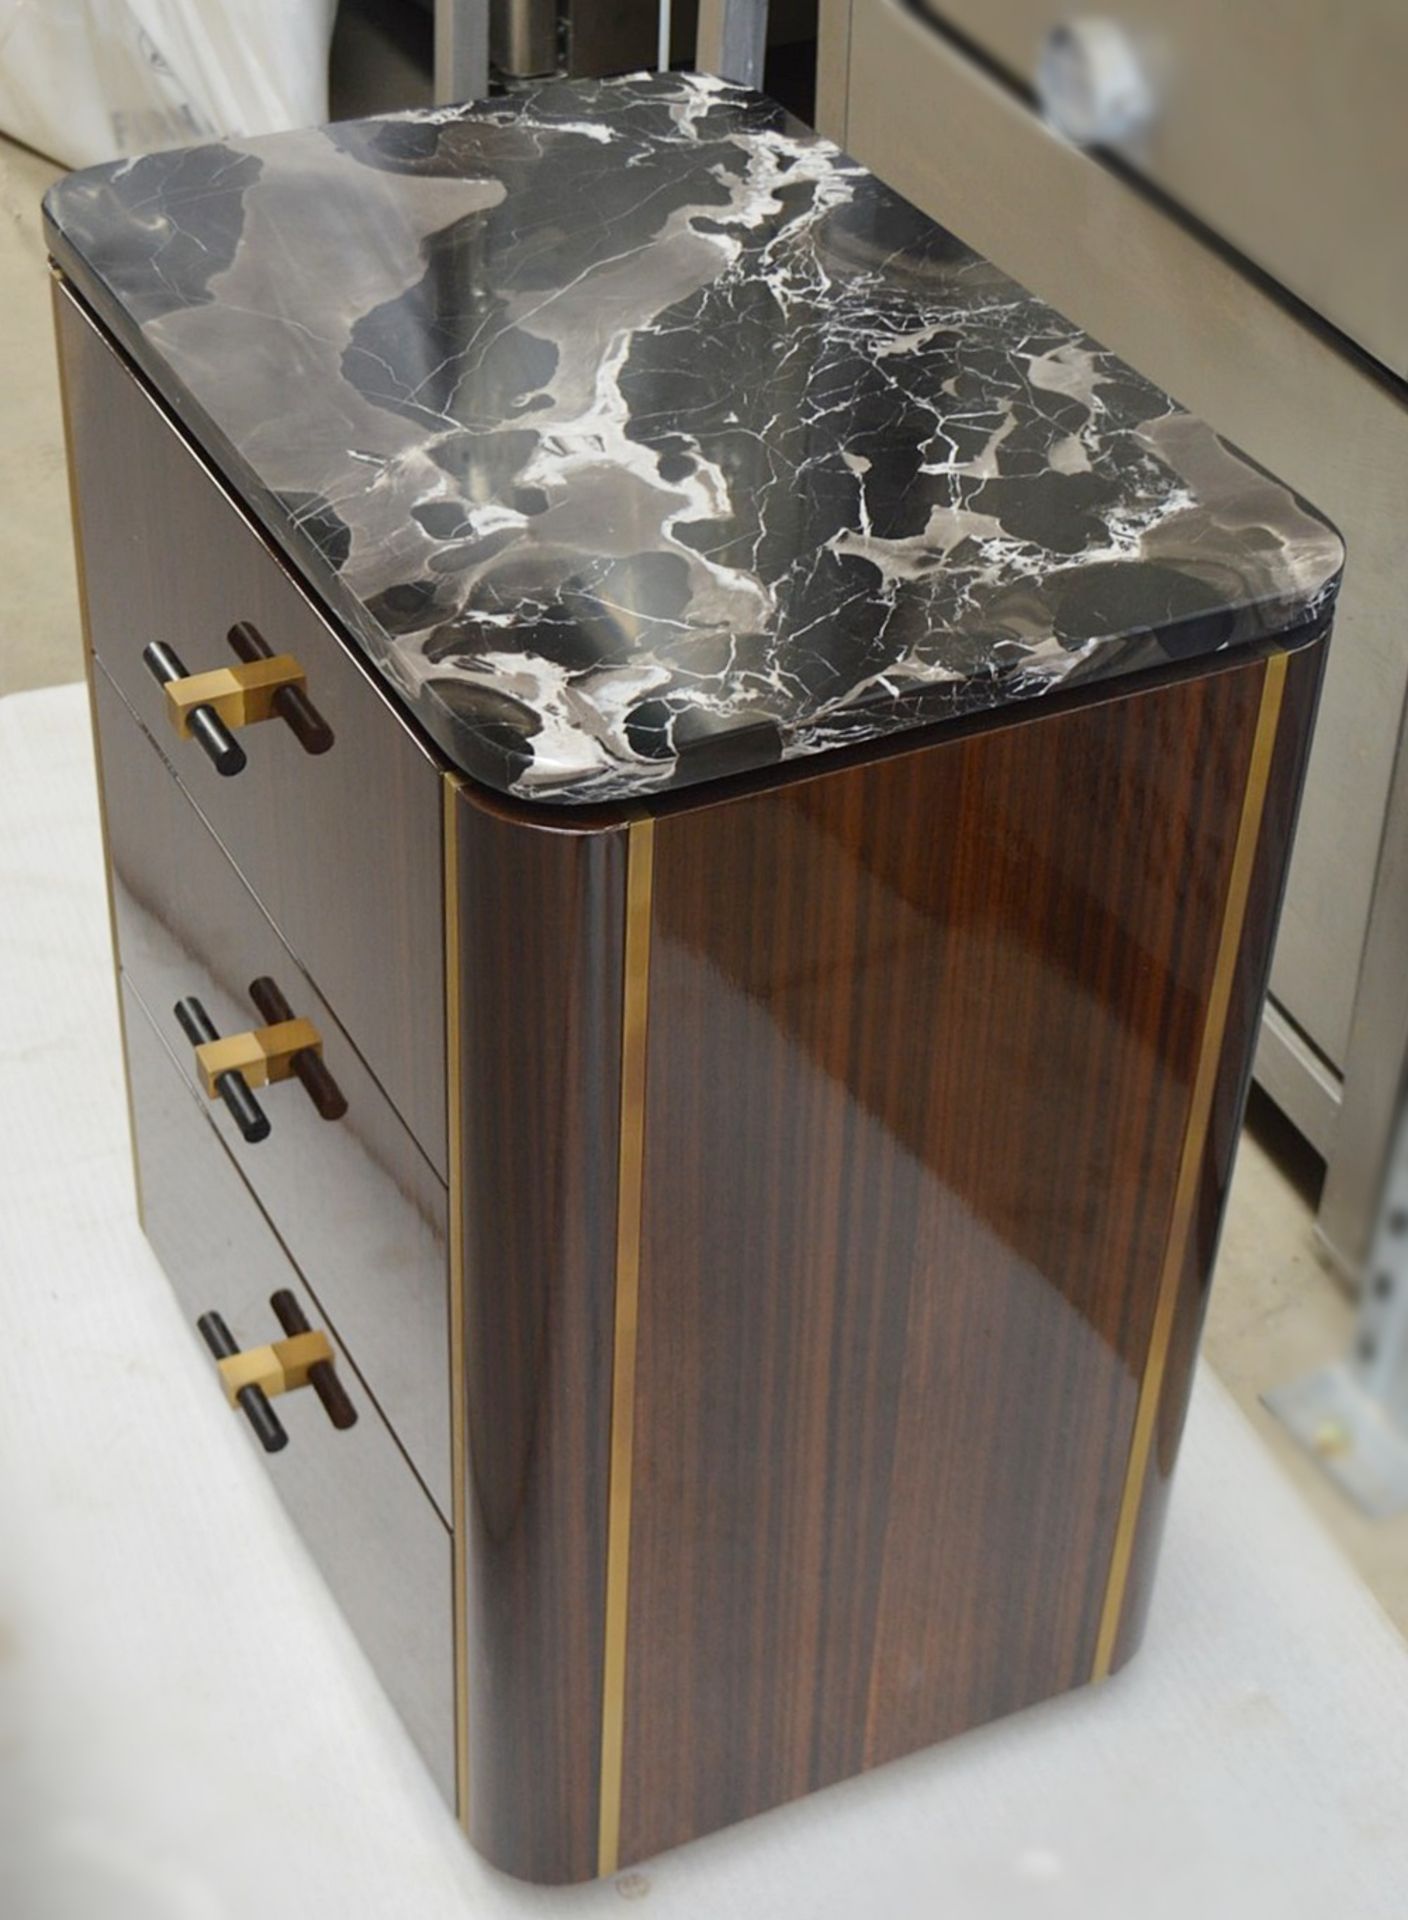 1 x FRATO 'BERNA' Luxury Designer Stone-topped Bedside Table With 3 Soft-close Lined Drawers - Image 5 of 7